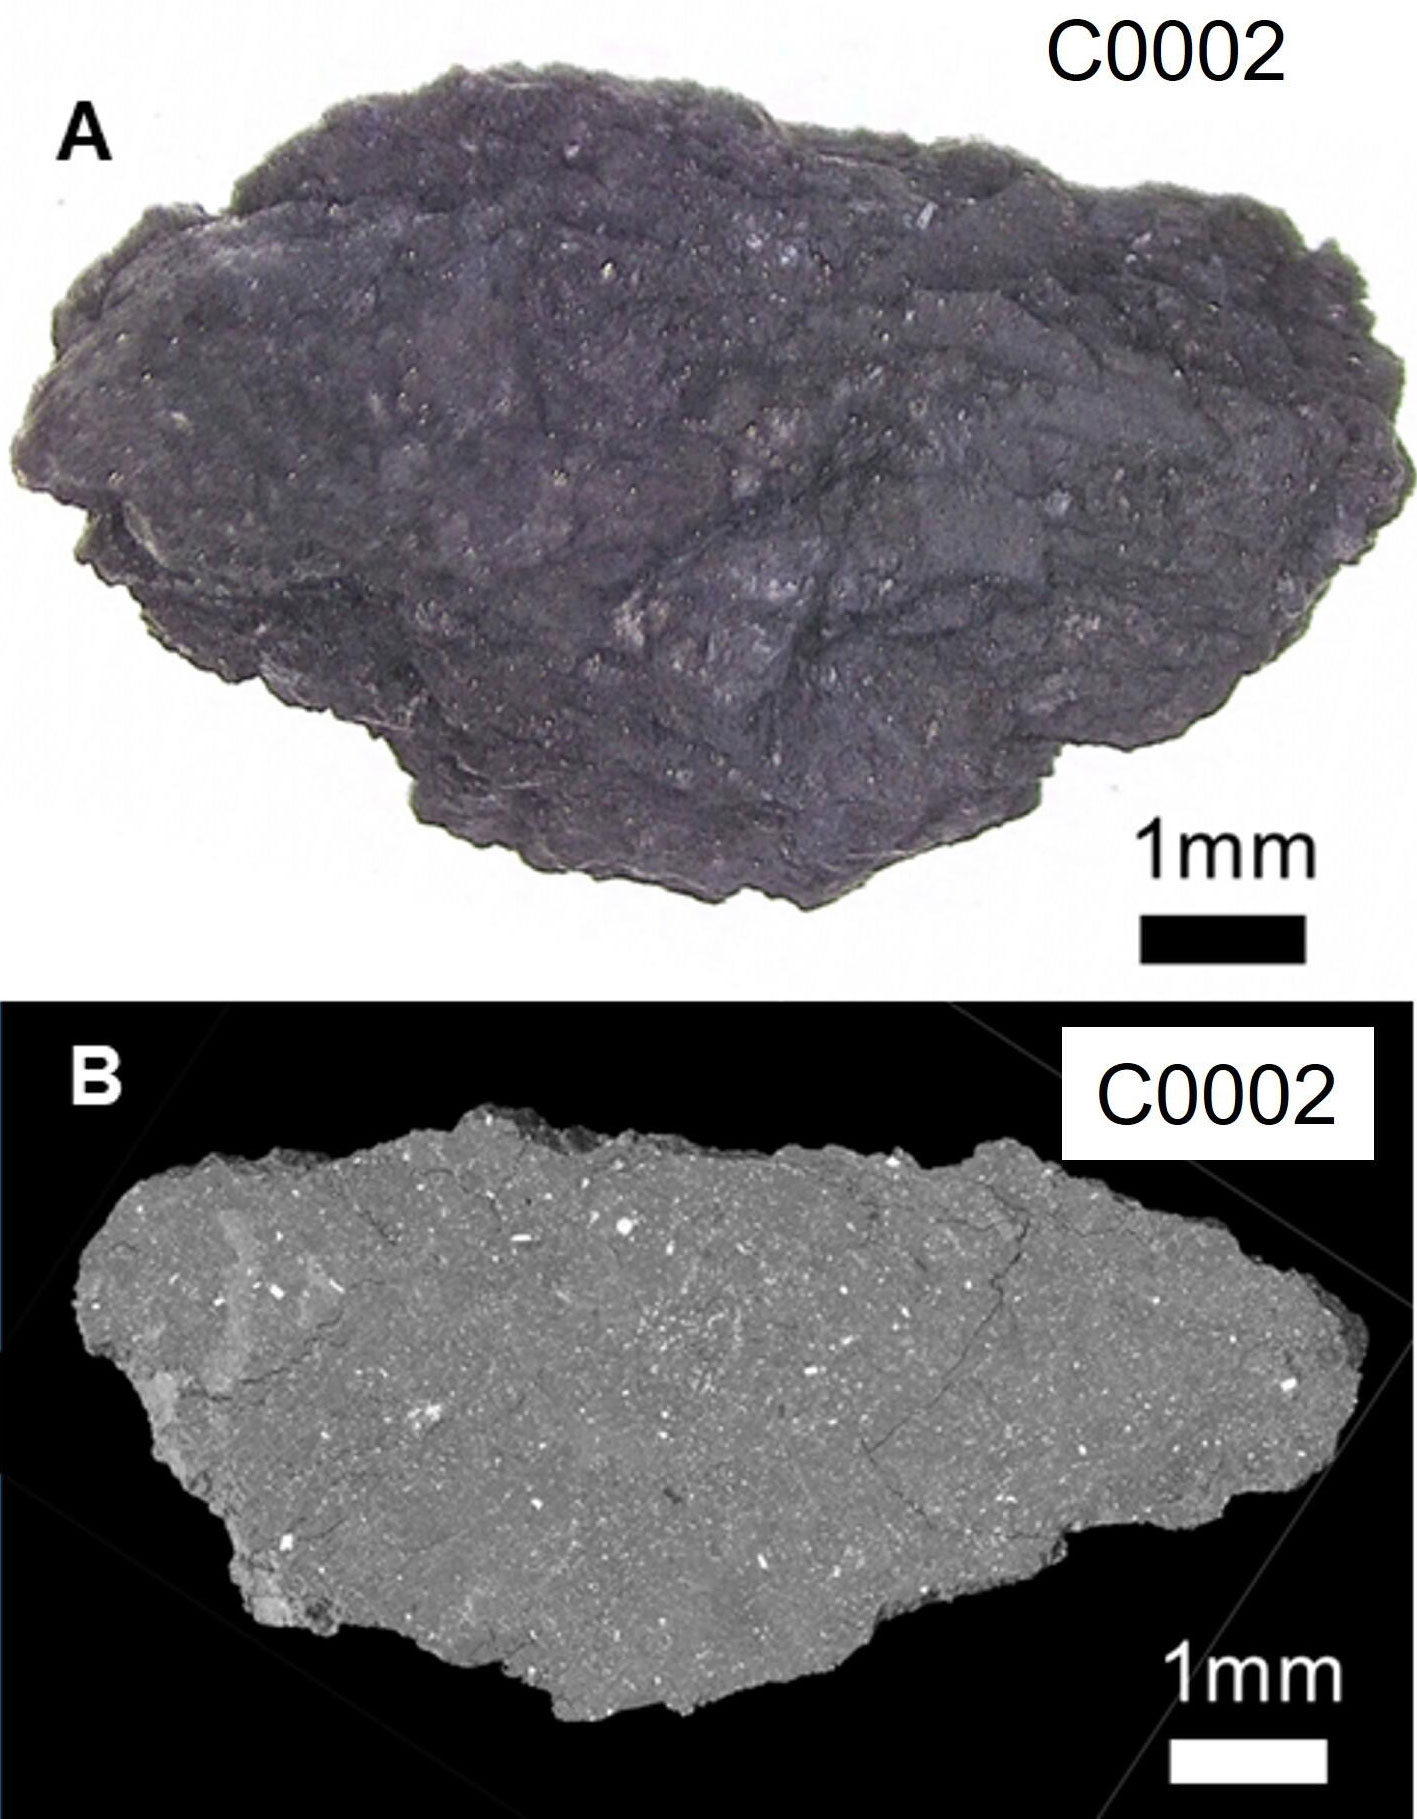 As can be seen, the entire sample consists of fine particles (grey)